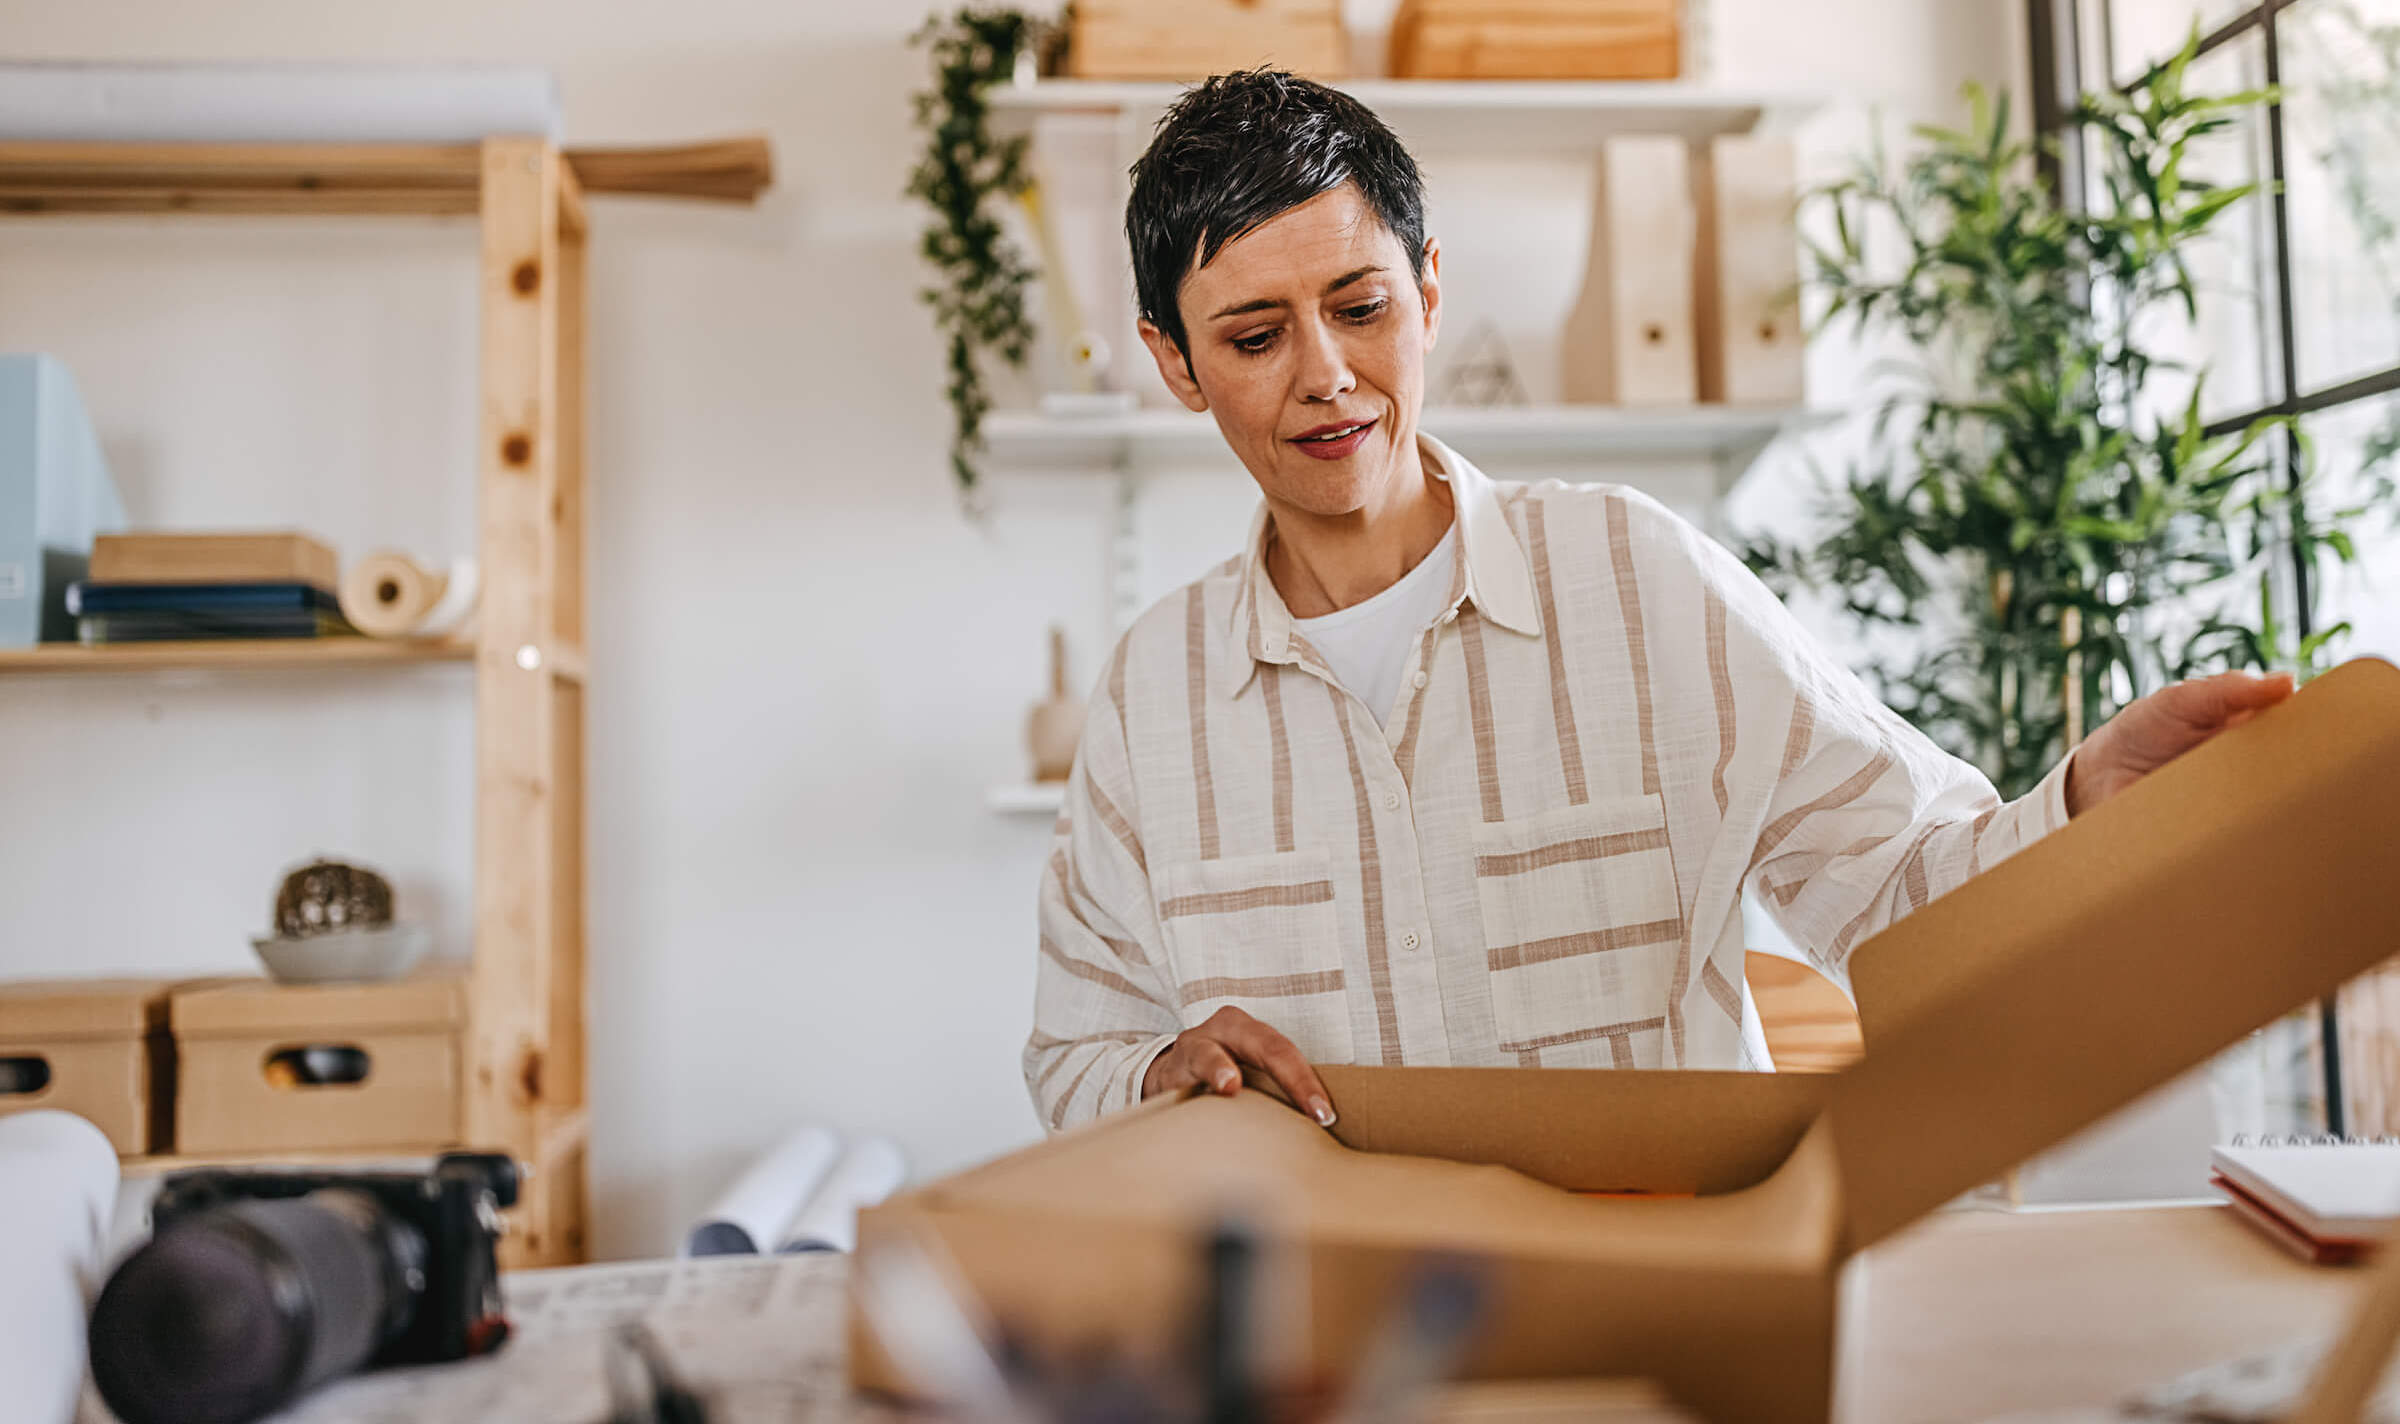 woman opening box at her place of business